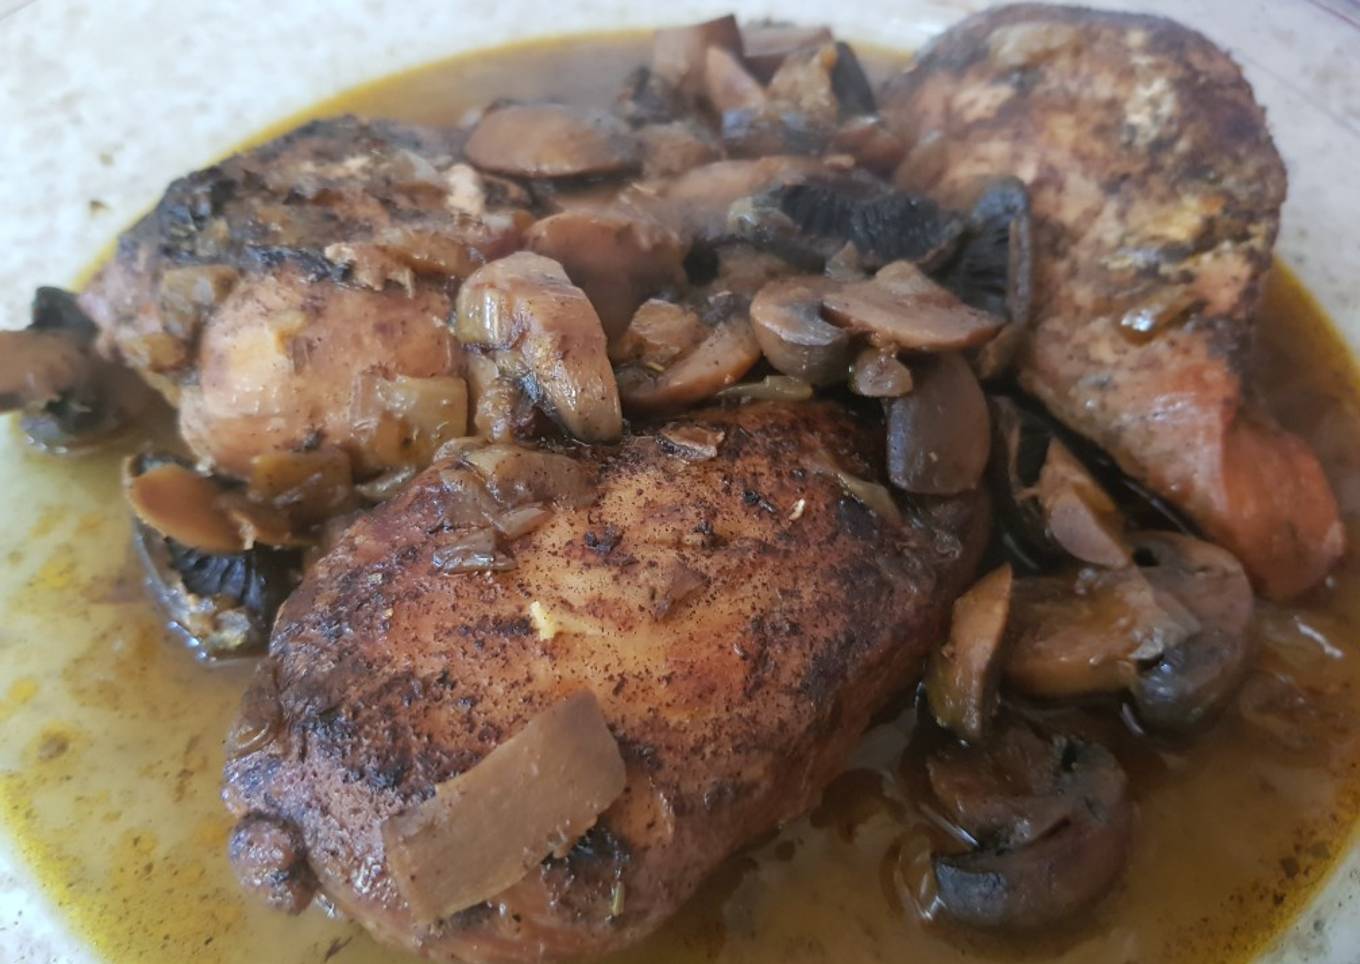 My Slowcooked Smoked Paprika Chicken and Mushrooms in Wine Sauce